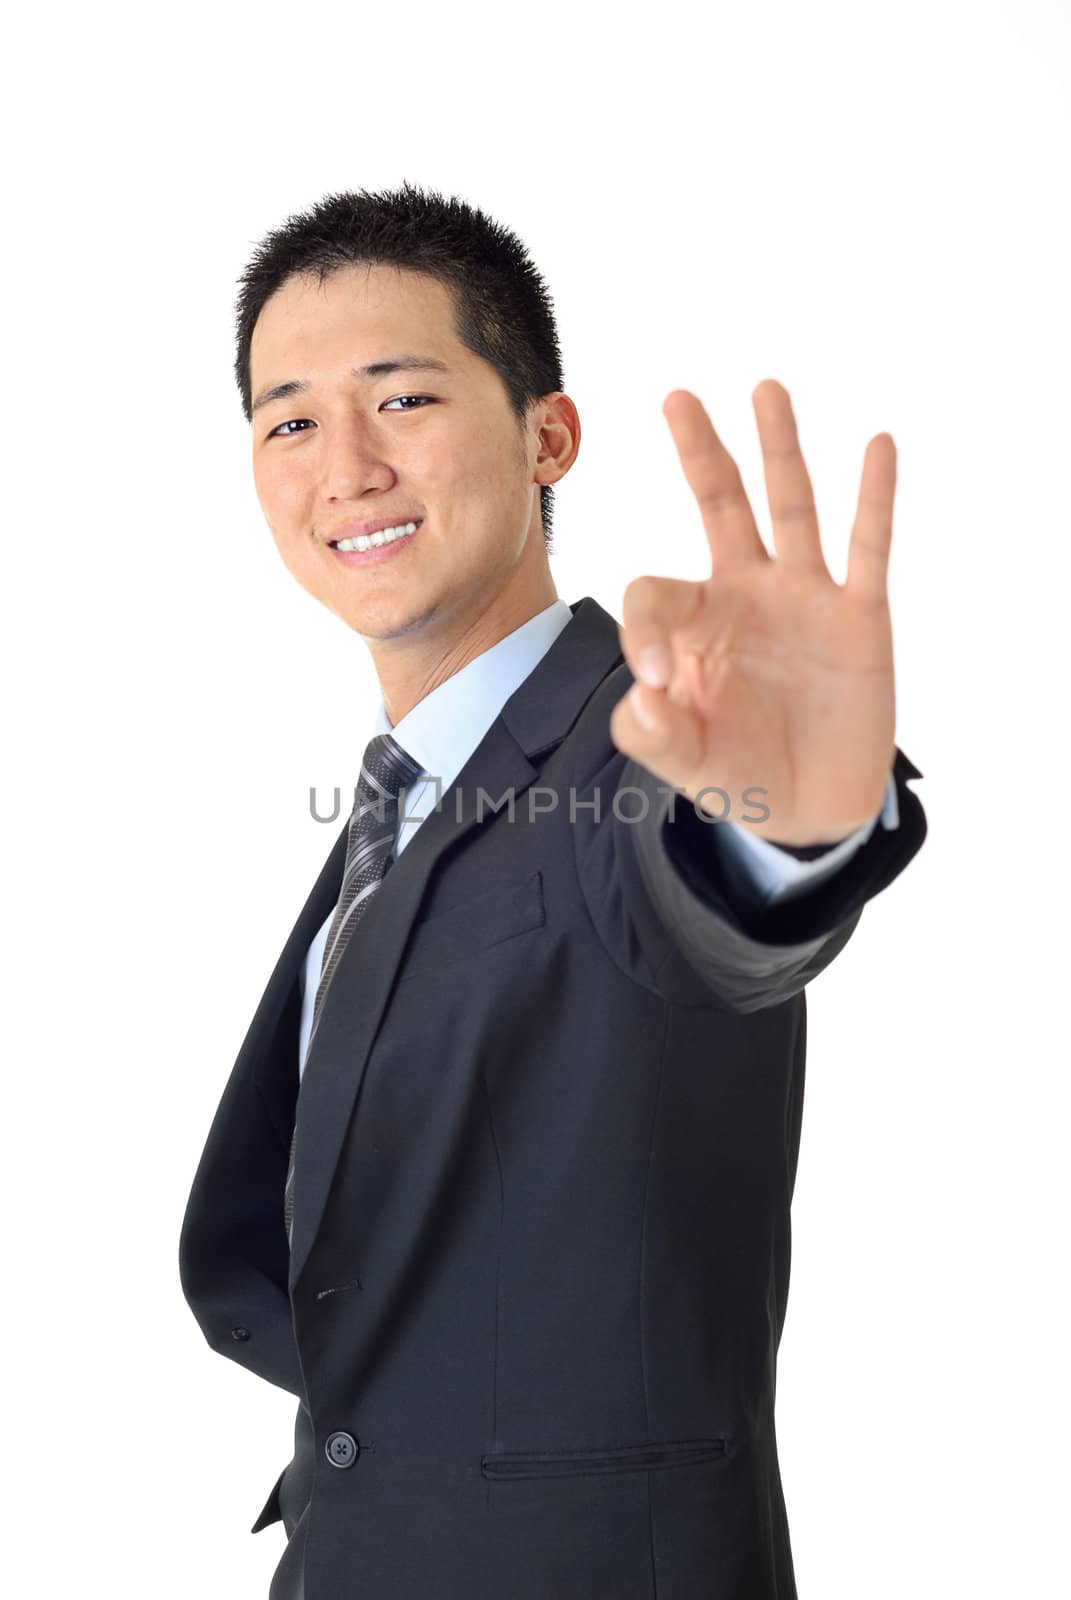 Closeup of a smiling young businessman gesturing an excellent job against white.